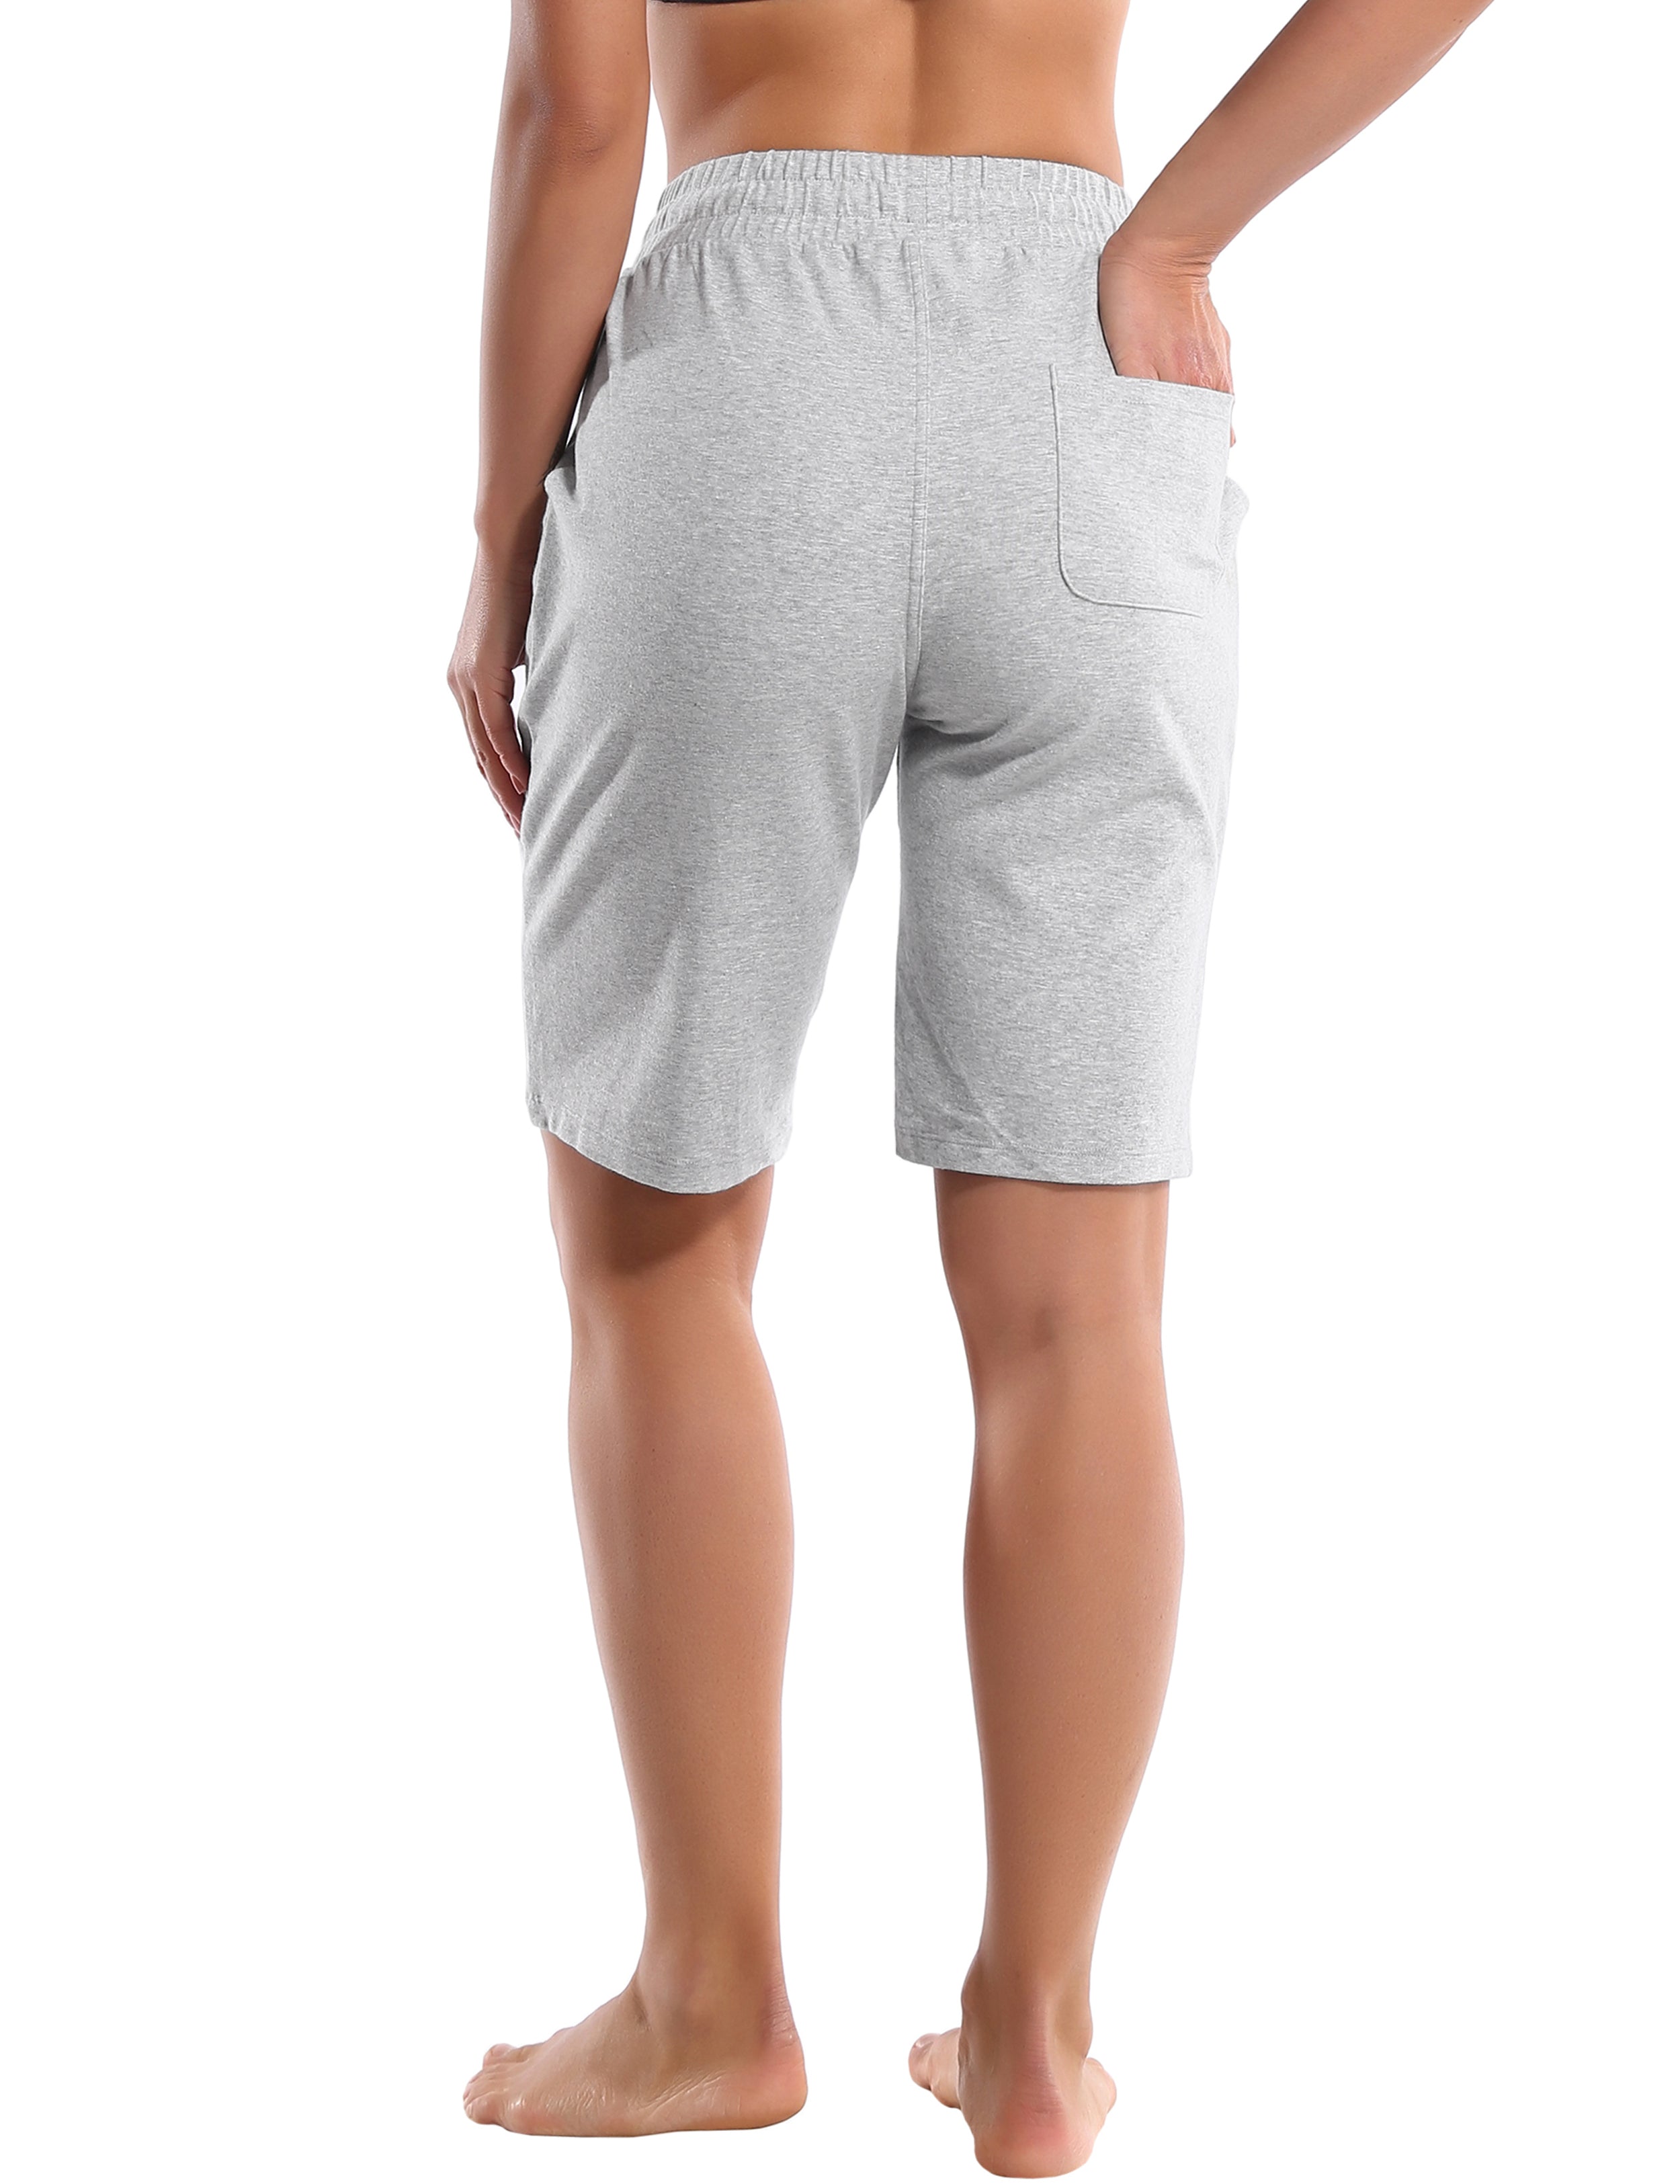 10" Joggers Shorts heathergray 90% Cotton, 10% Spandex Soft and Elastic Drawstring closure Lightweight & breathable fabric wicks away sweat to keep you comfortable Elastic waistband with internal drawcord for a snug, adjustable fit Big side pockets are available for 4.7", 5", 5.5" mobile phone Reflective logo helps you stand out in low light Perfect for any types of outdoor exercises and indoor fitness,like Pilates,Pilates,walking,jogging,lounging,workout,gym fitness,casual use,etc